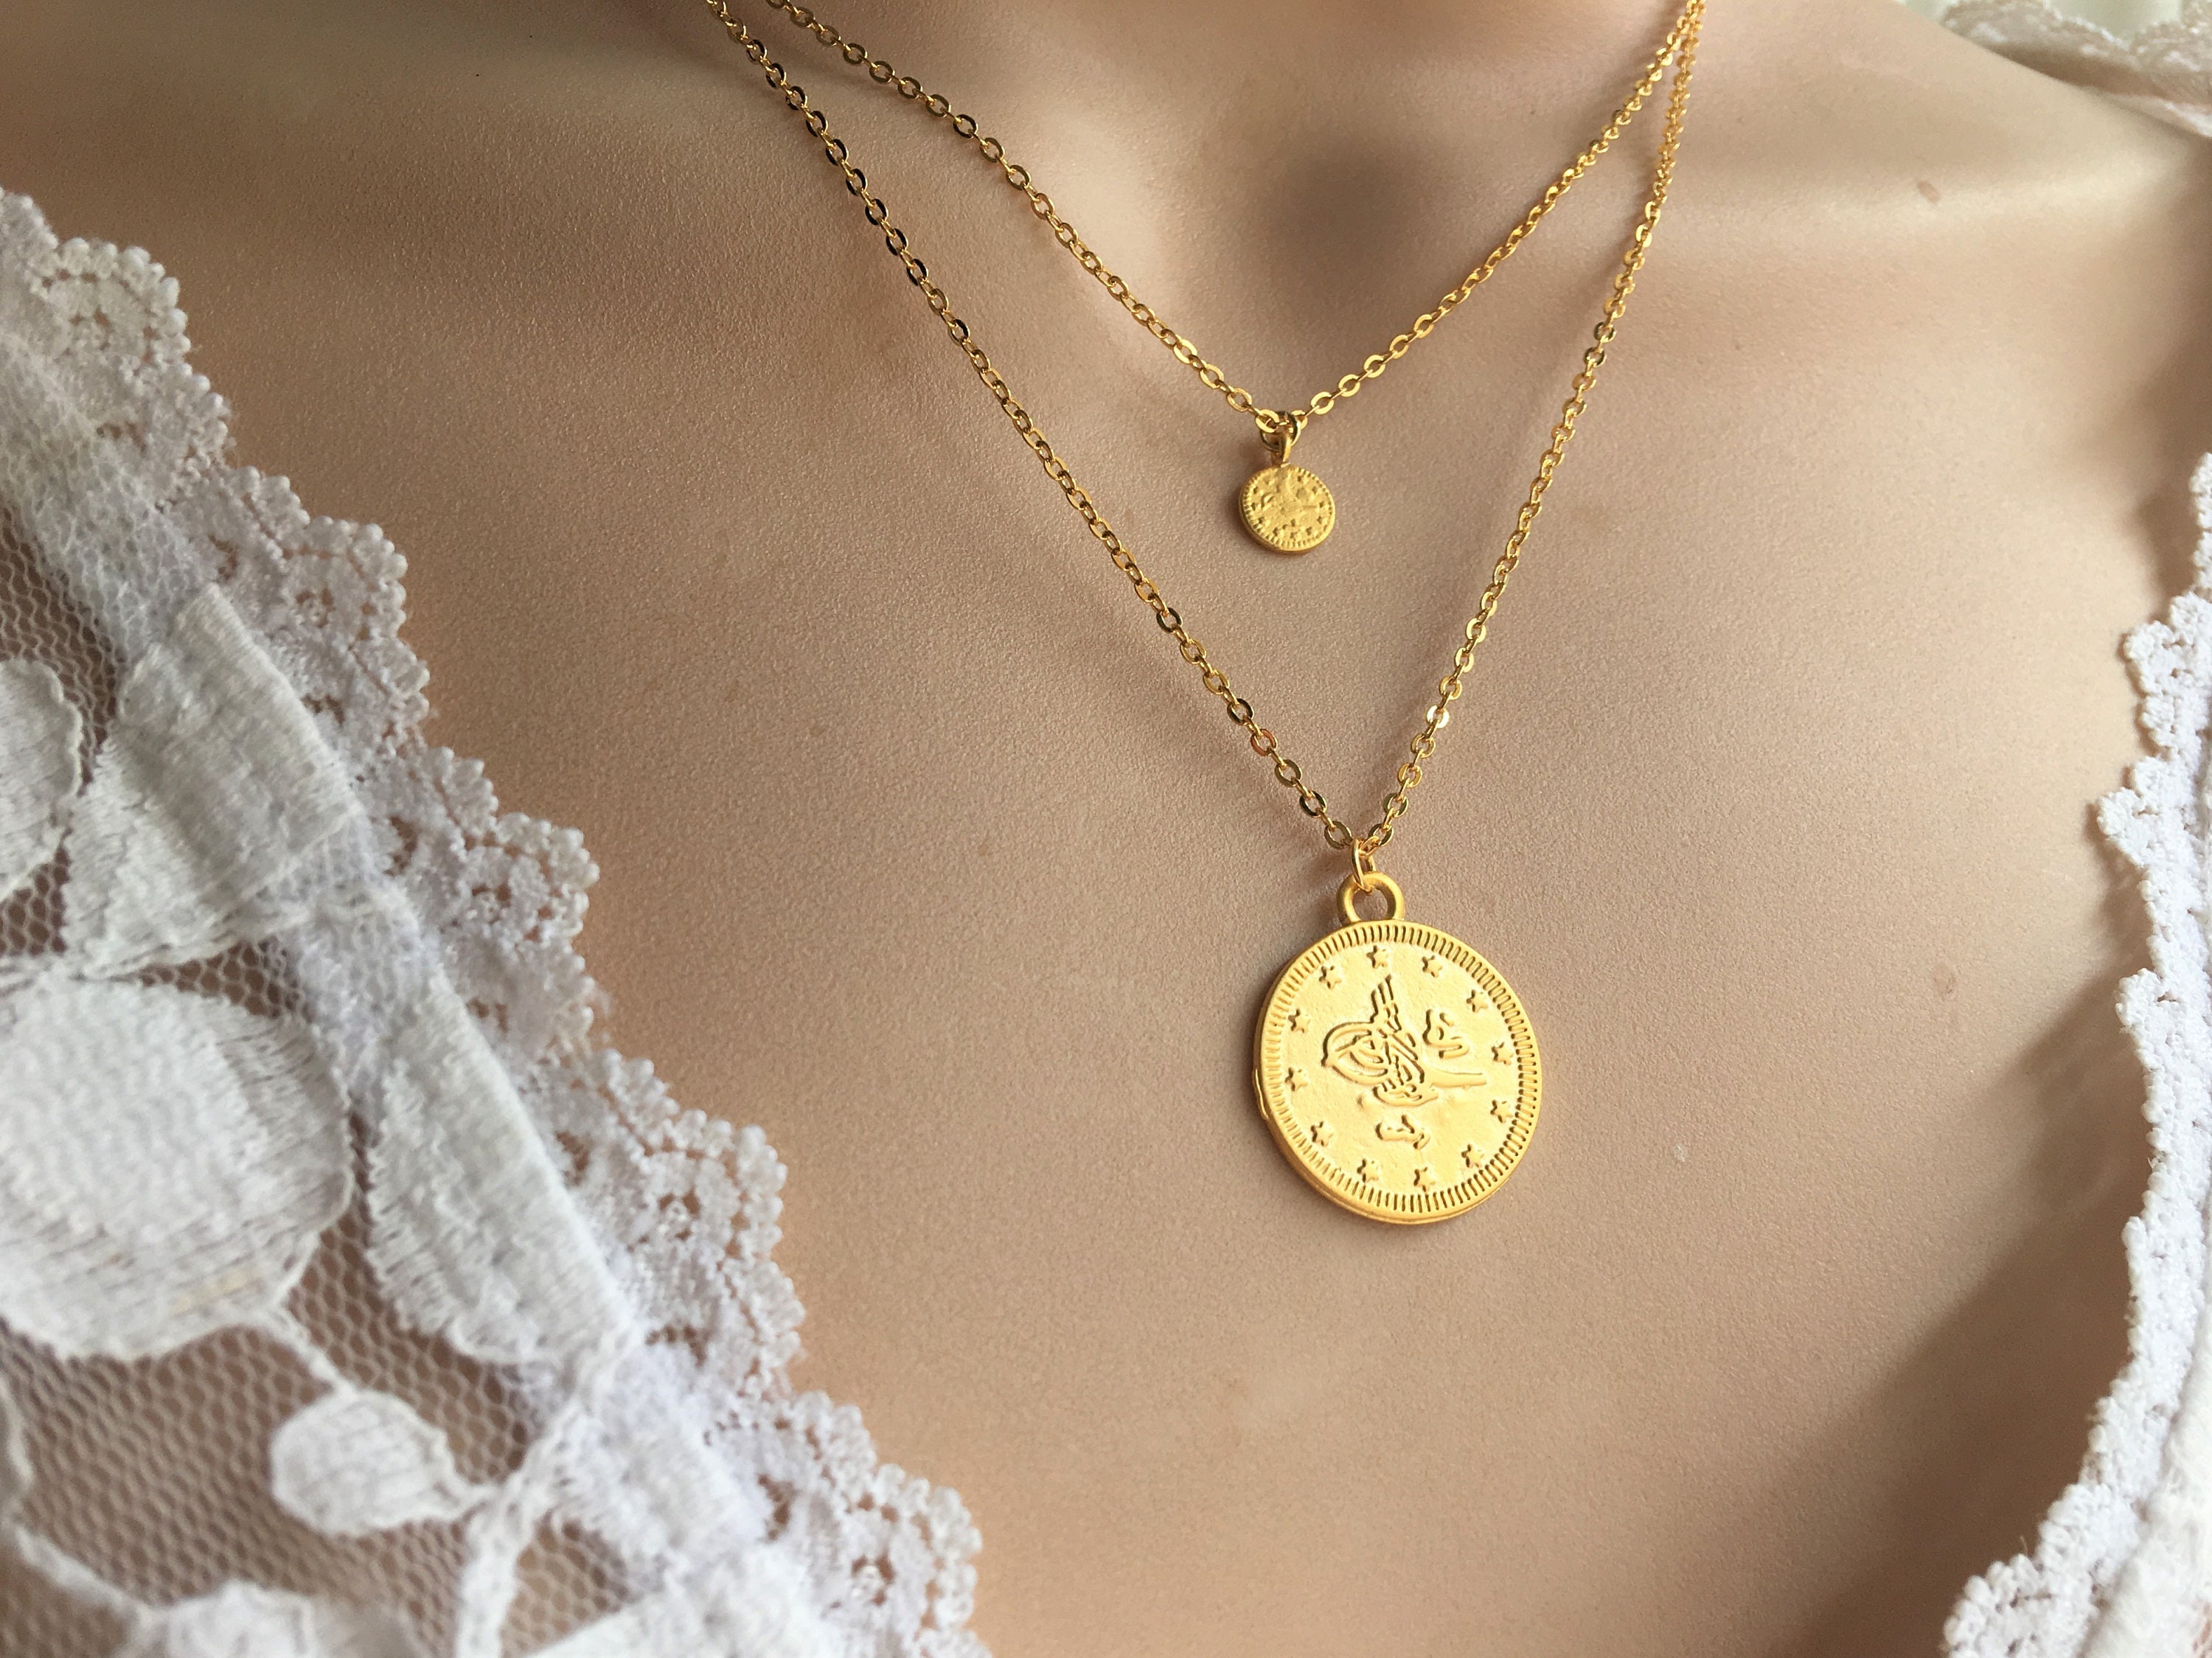 Gold Coin Necklace Set / Ottoman Coin Necklace / Turkish Coin Necklace /  Round Gold Medallion, Gold Disc Pendant / Simple Jewelry -  Canada